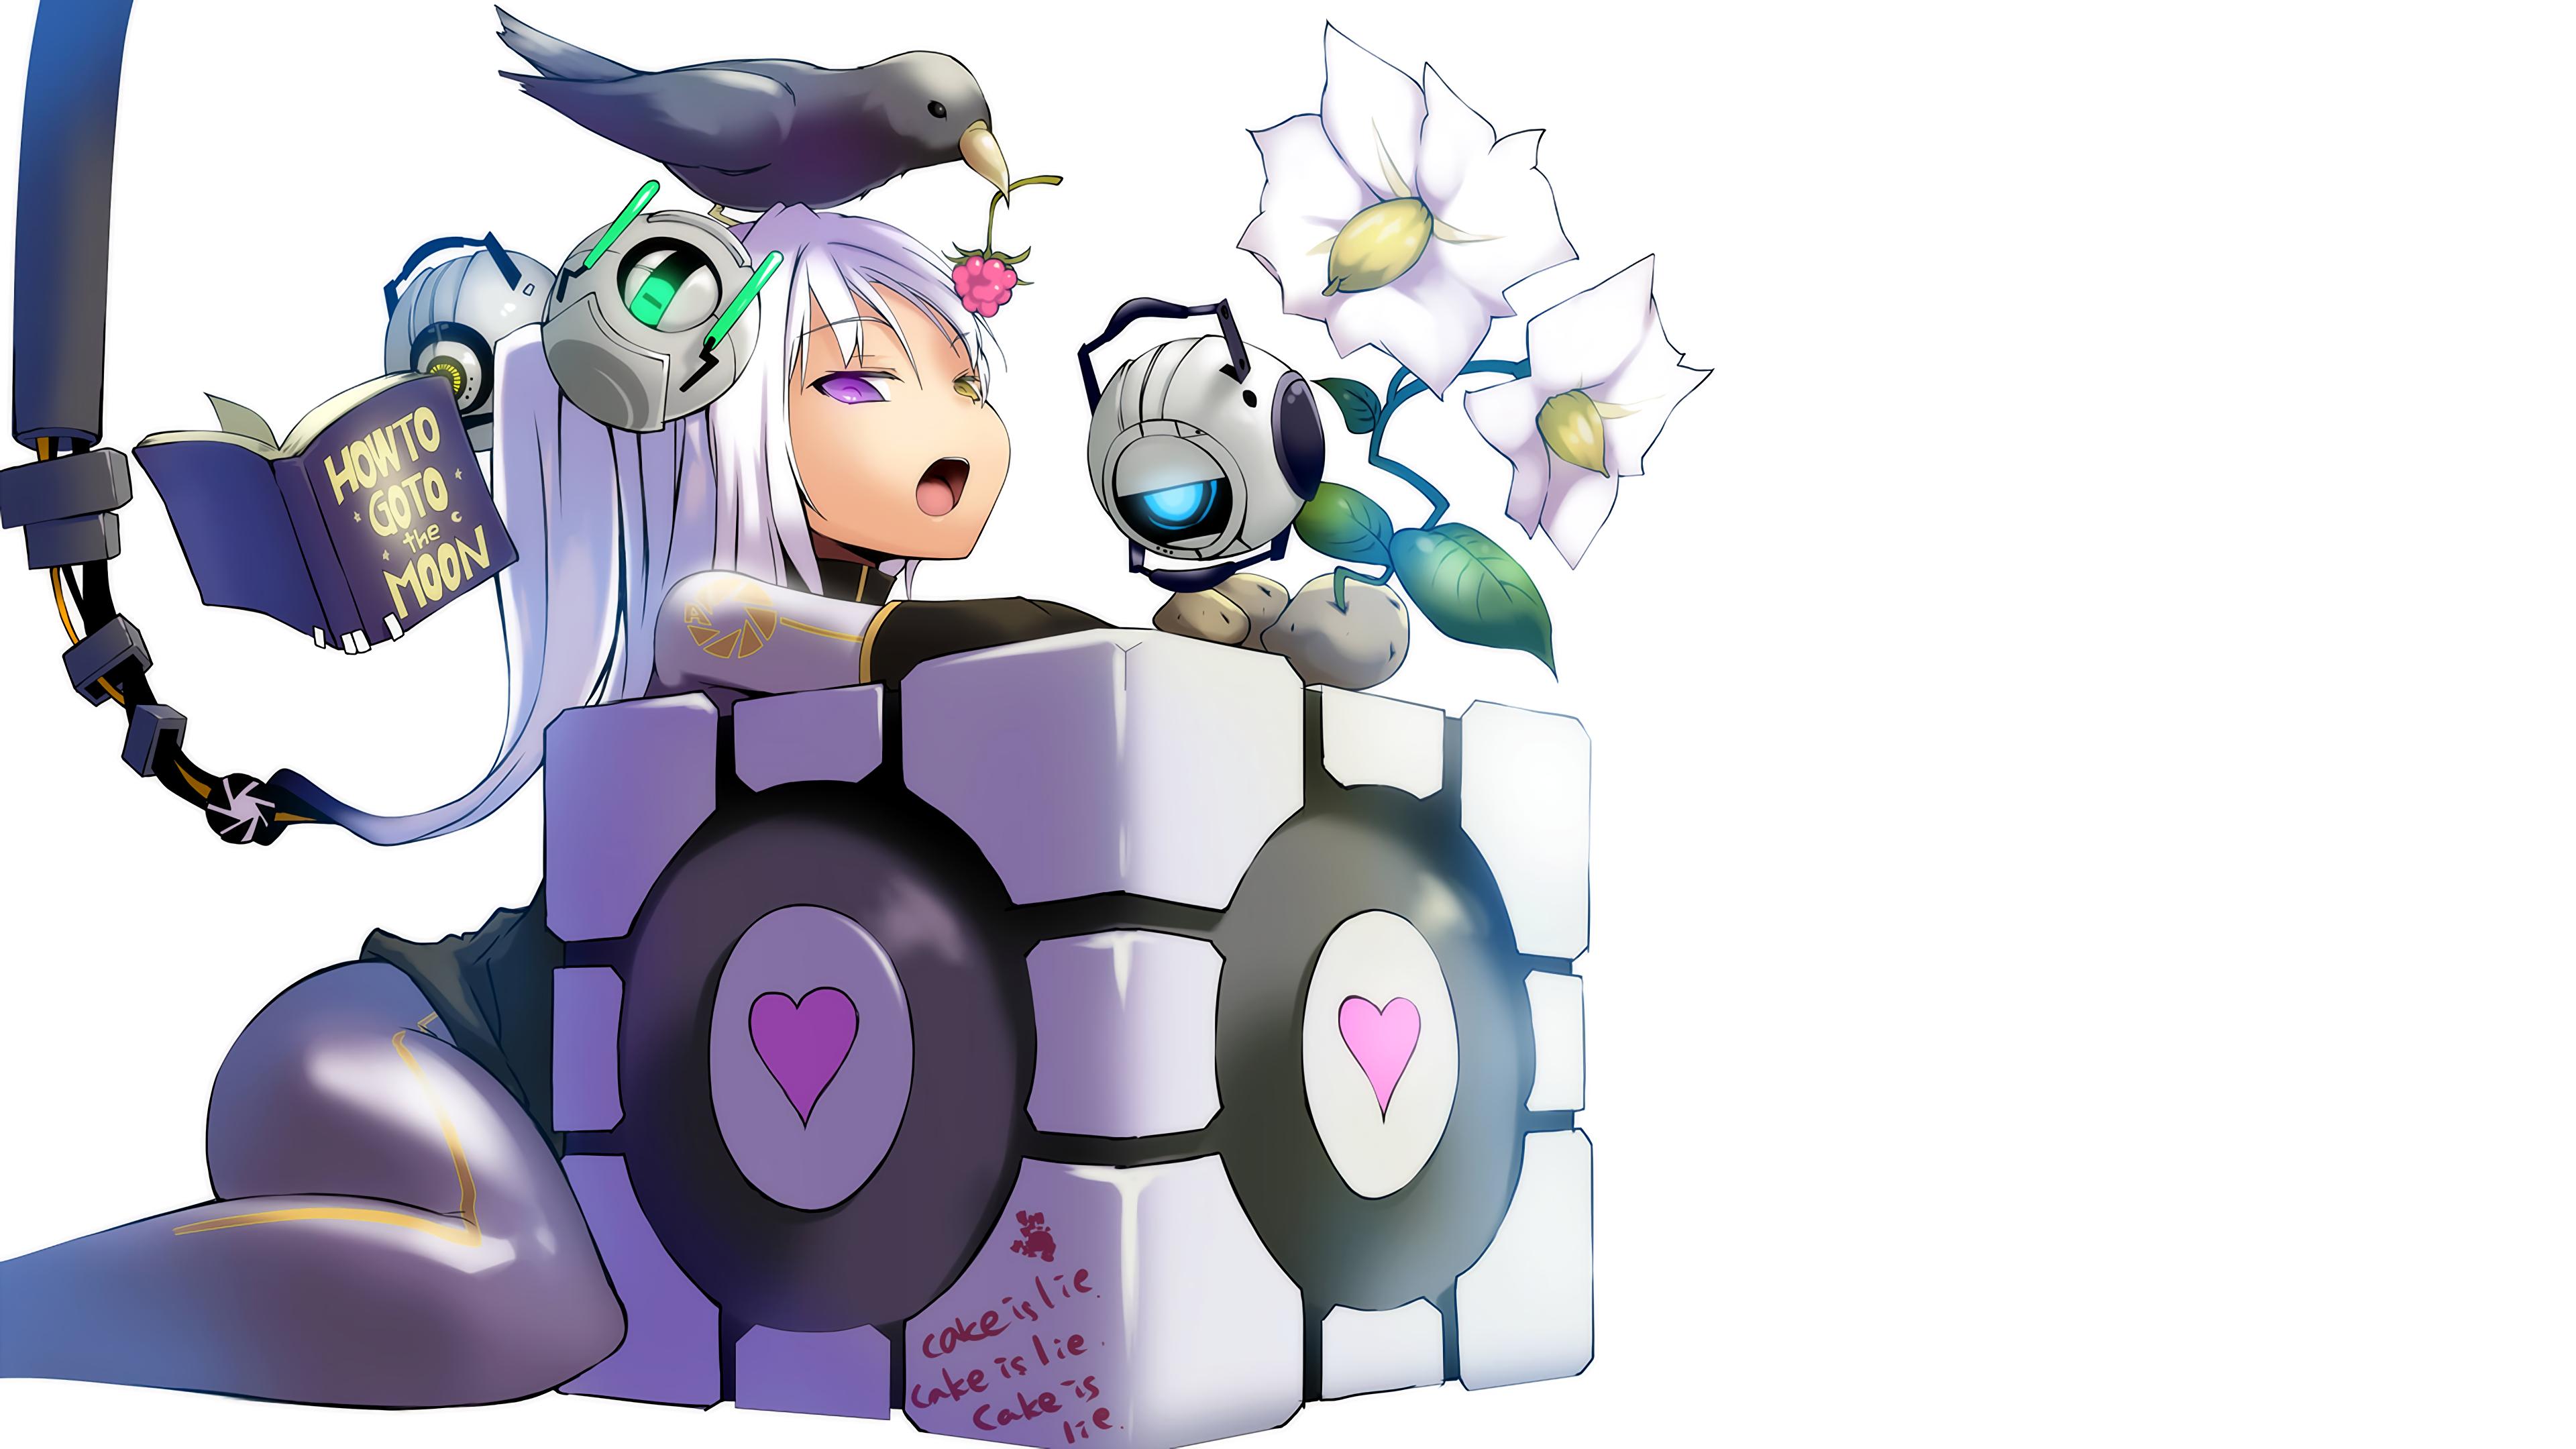 HD wallpaper, Simple Background, 3D Blocks, Aperture Laboratories, Companion Cube, Glados, Video Game Art, Humor, Video Games, White Background, Open Mouth, Birds, Books, Pc Gaming, Pale, Anime, Anime Girls, Video Game Girls